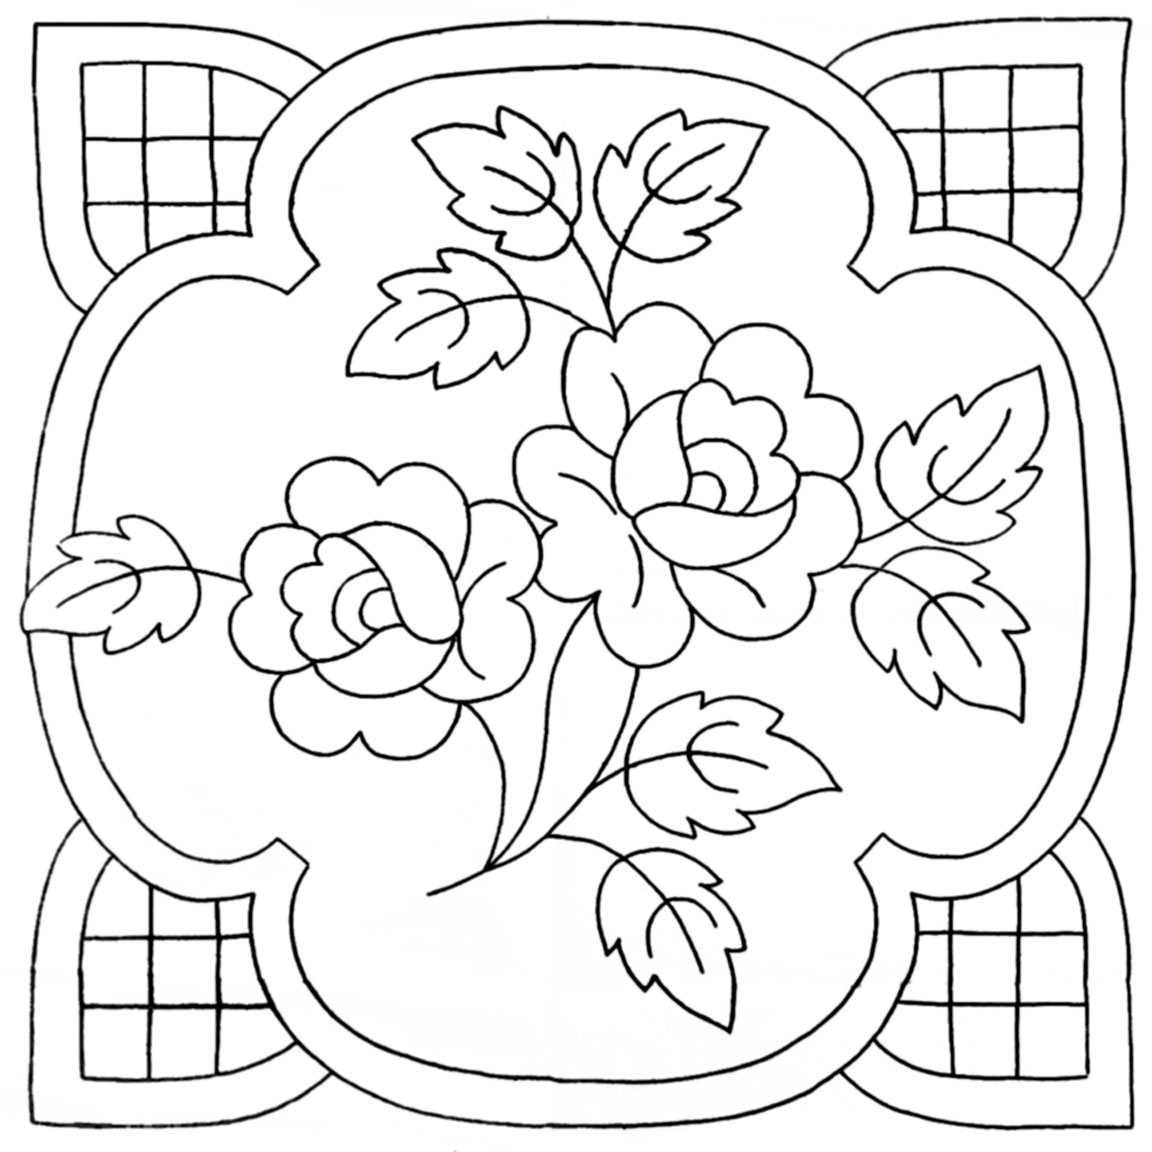 Embroidery Patterns For Quilts Hand Quilting Designs From Vintage Embroidery Transfers Q Is For